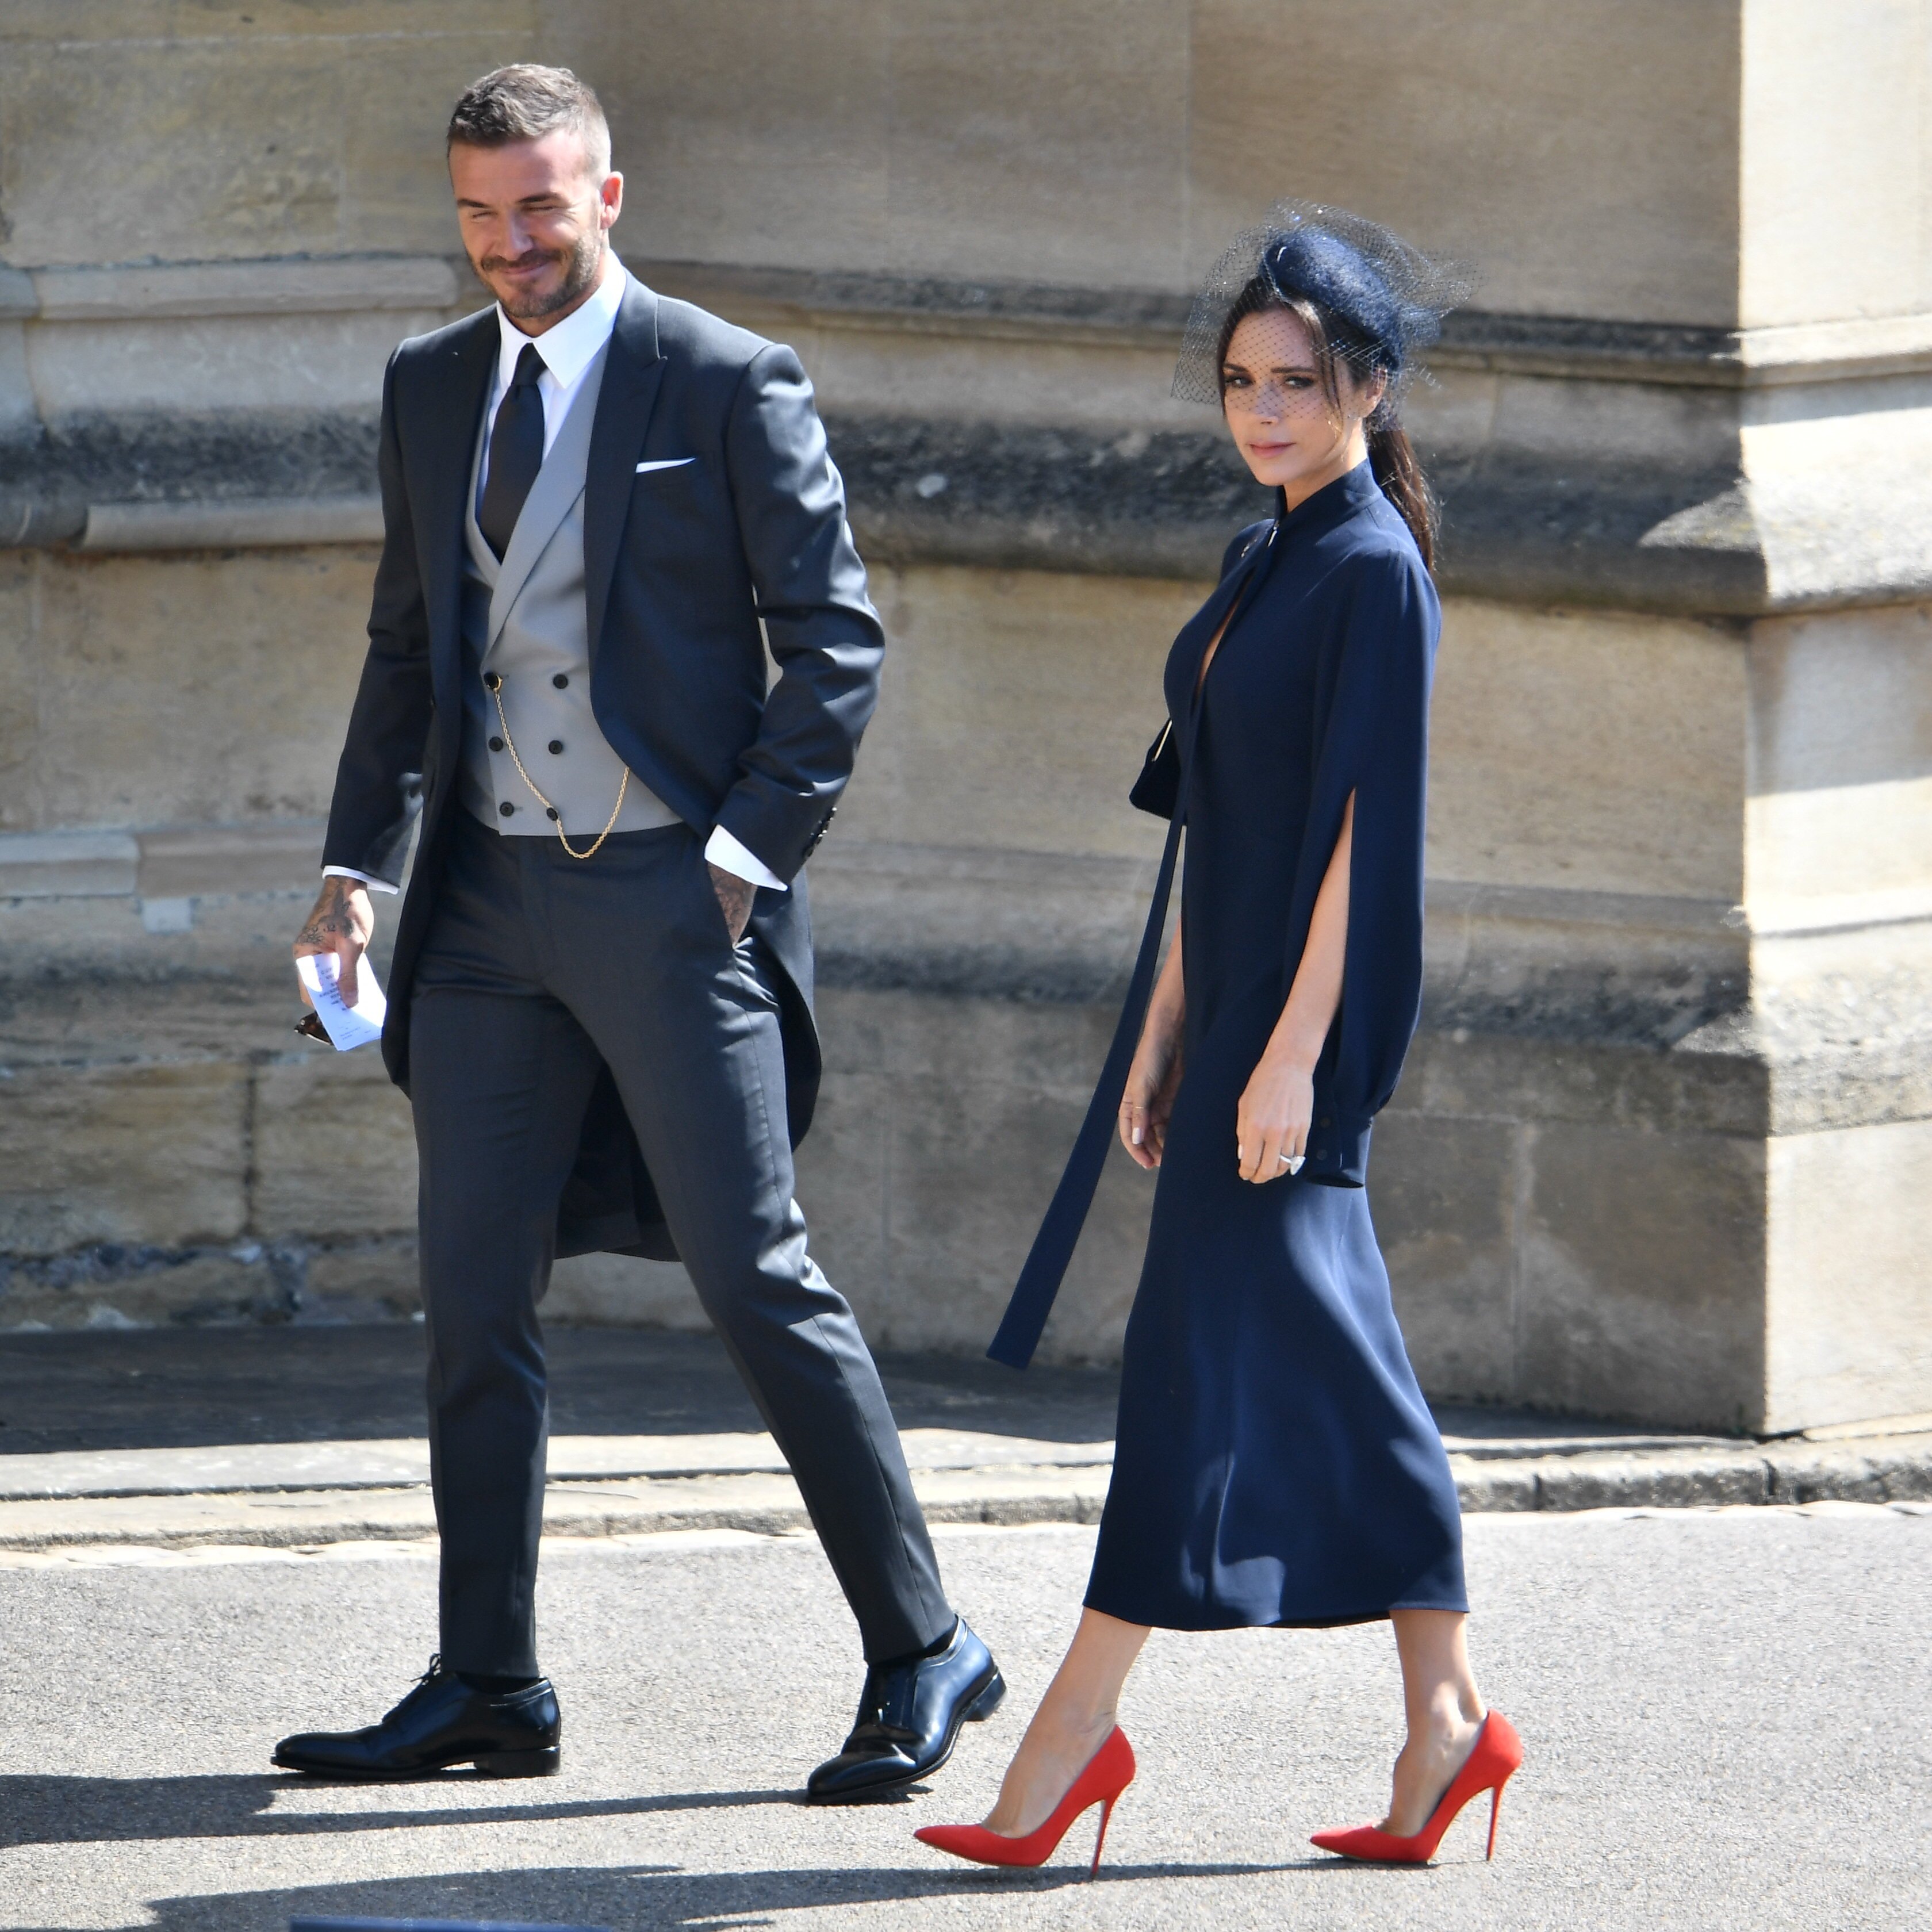 David and Victoria Beckham at St George's Chapel at Windsor Castle after Meghan Markle and Prince Harry's wedding on May 19, 2018, in Windsor, England. | Source: Getty Images